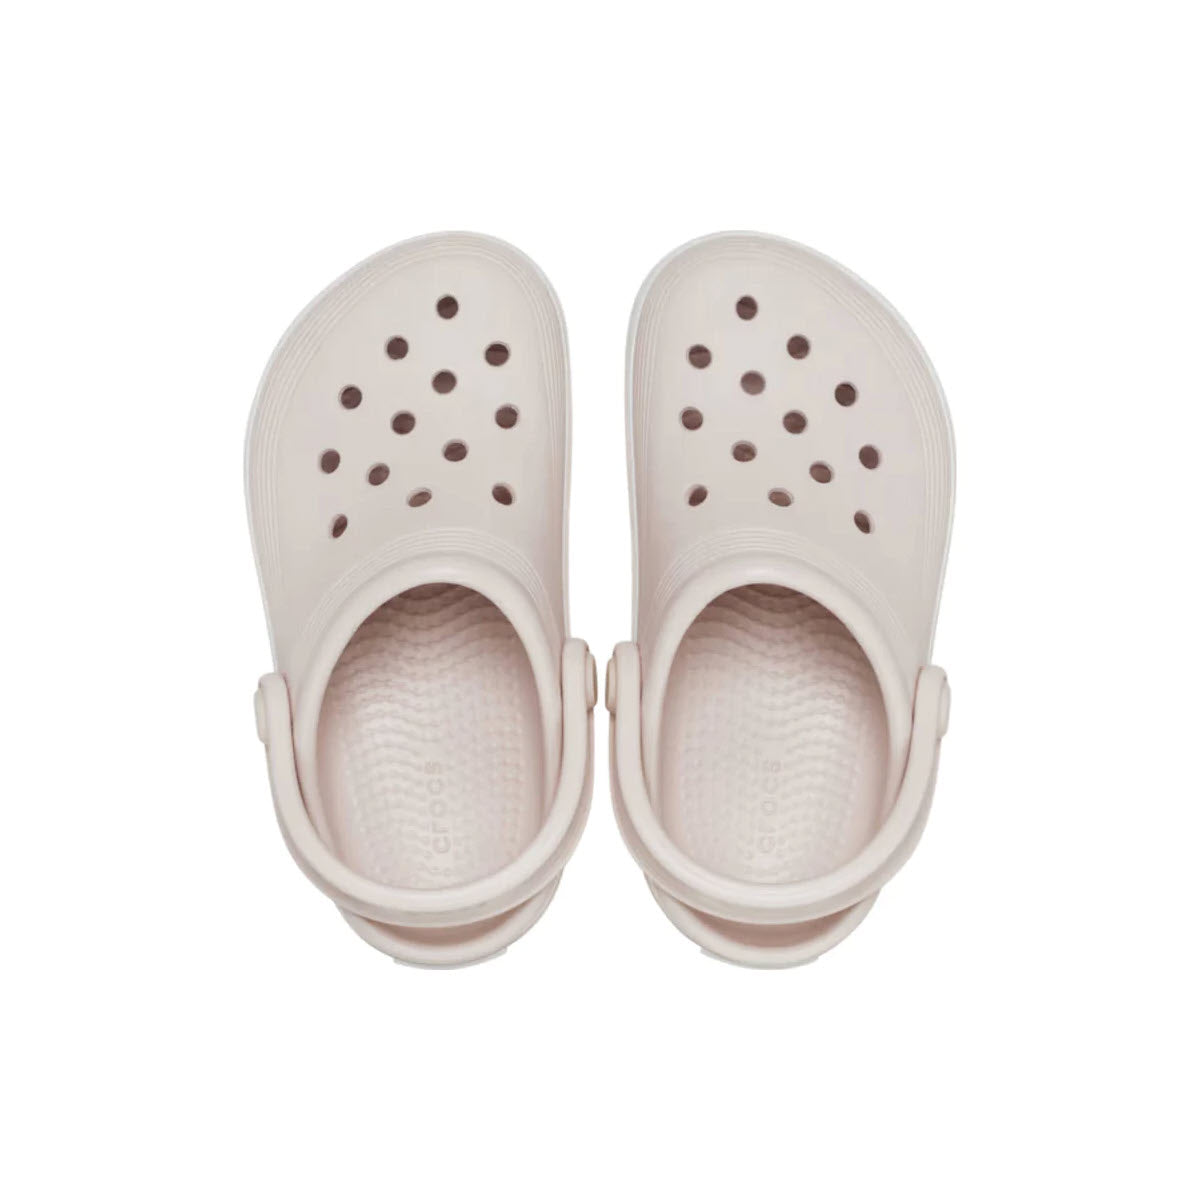 A pair of Crocs Off Court clogs in quartz color, ideal for school wear, isolated on a white background.